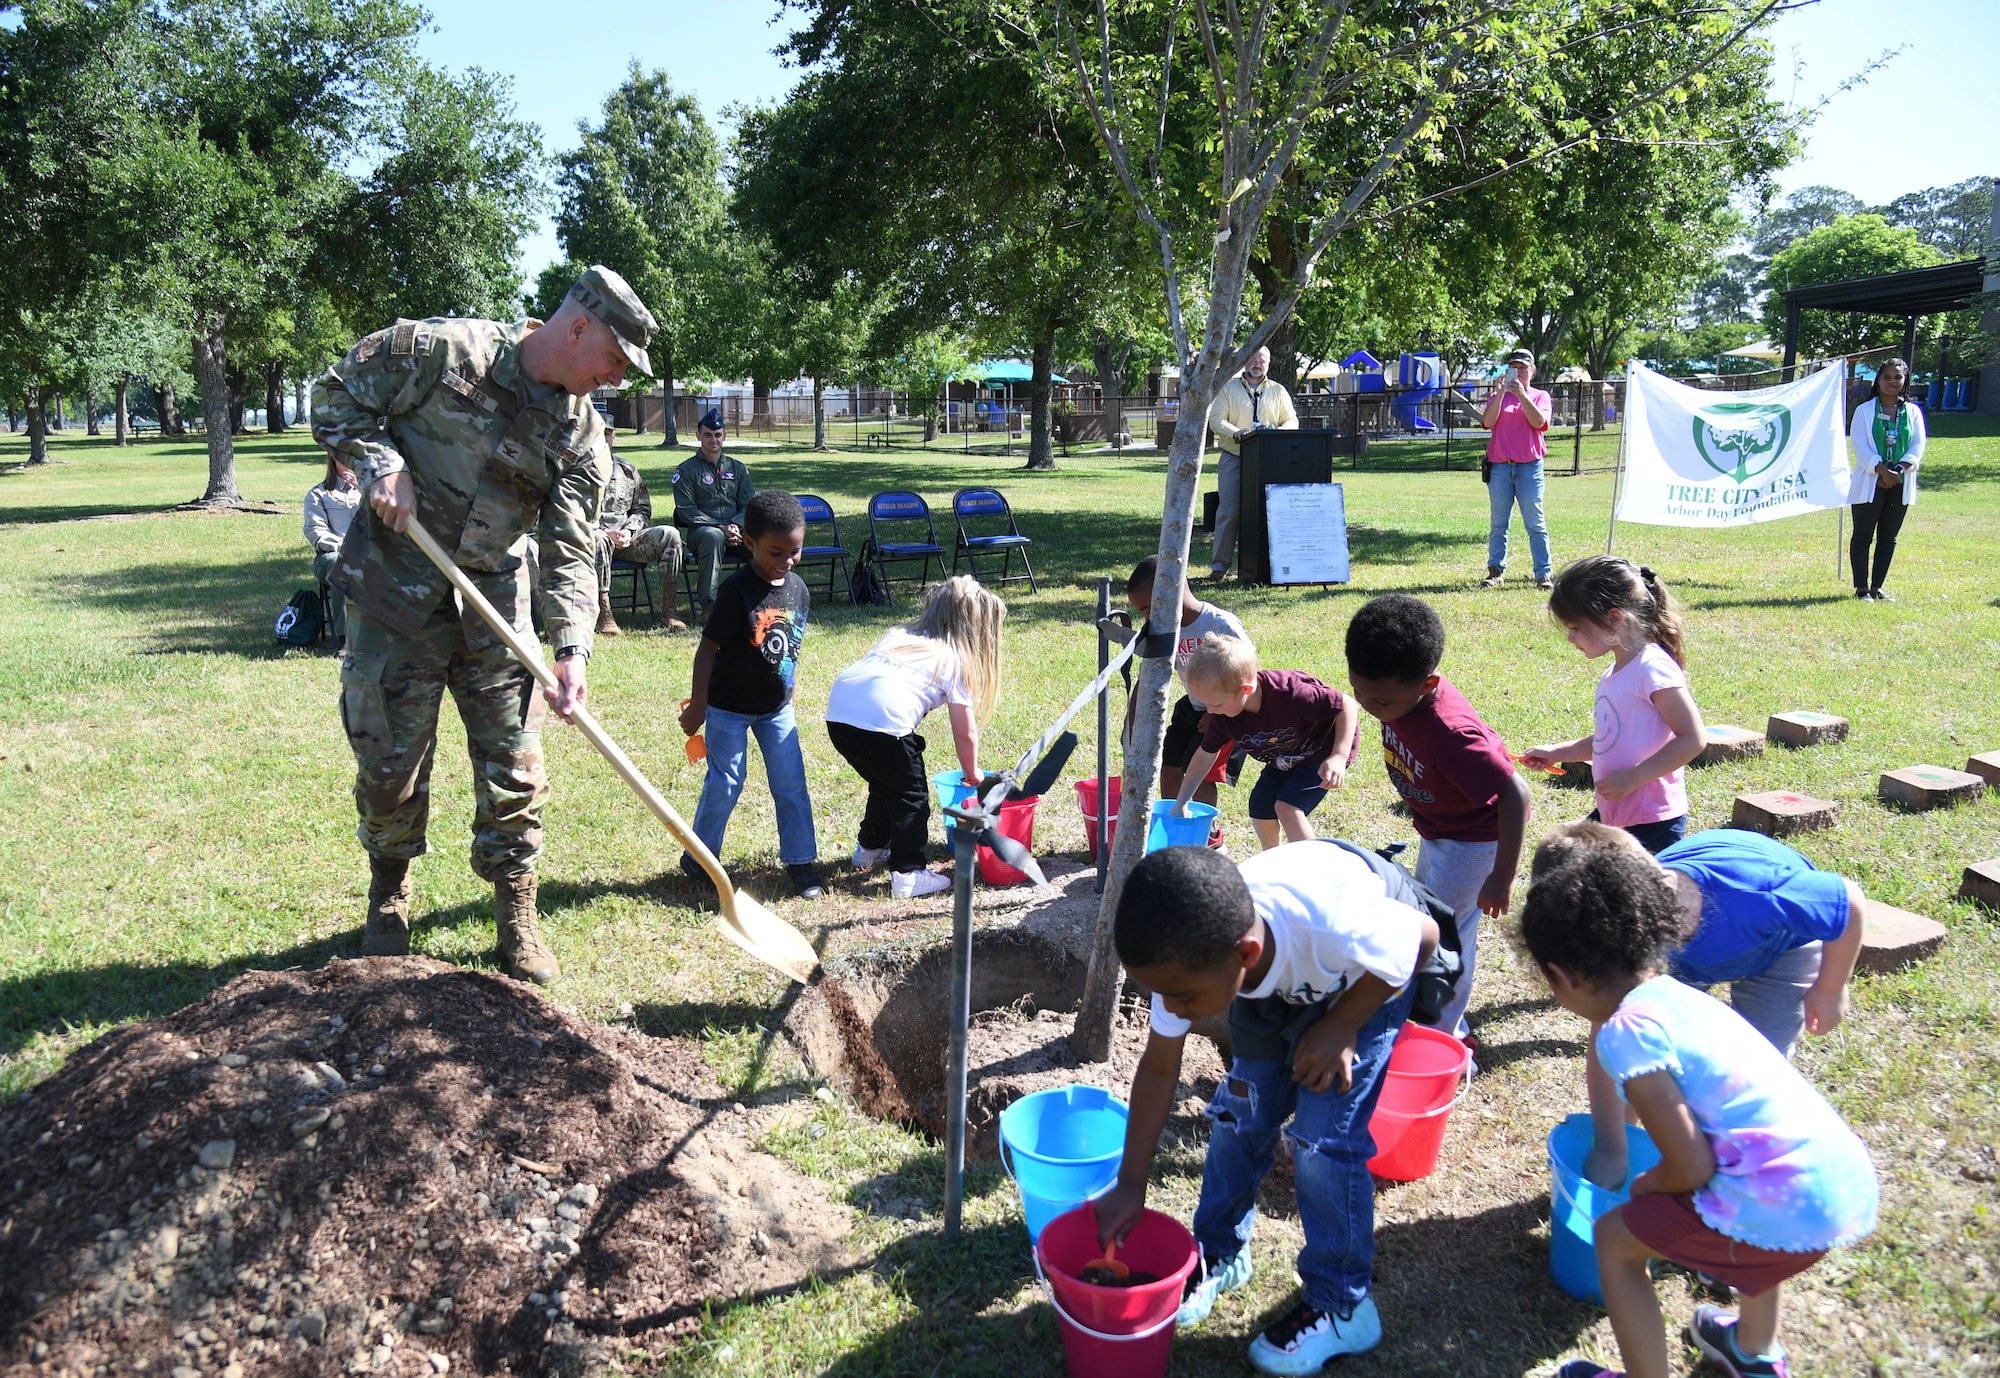 U.S. Air Force Col. William Hunter, 81st Training Wing commander, and children from the Keesler Child Development Center participate in a tree planting ceremony during the Arbor Day Celebration at Keesler Air Force Base, Mississippi, April 28, 2022. A Tree City USA flag presentation also took place at the event. (U.S. Air Force photo by Kemberly Groue)